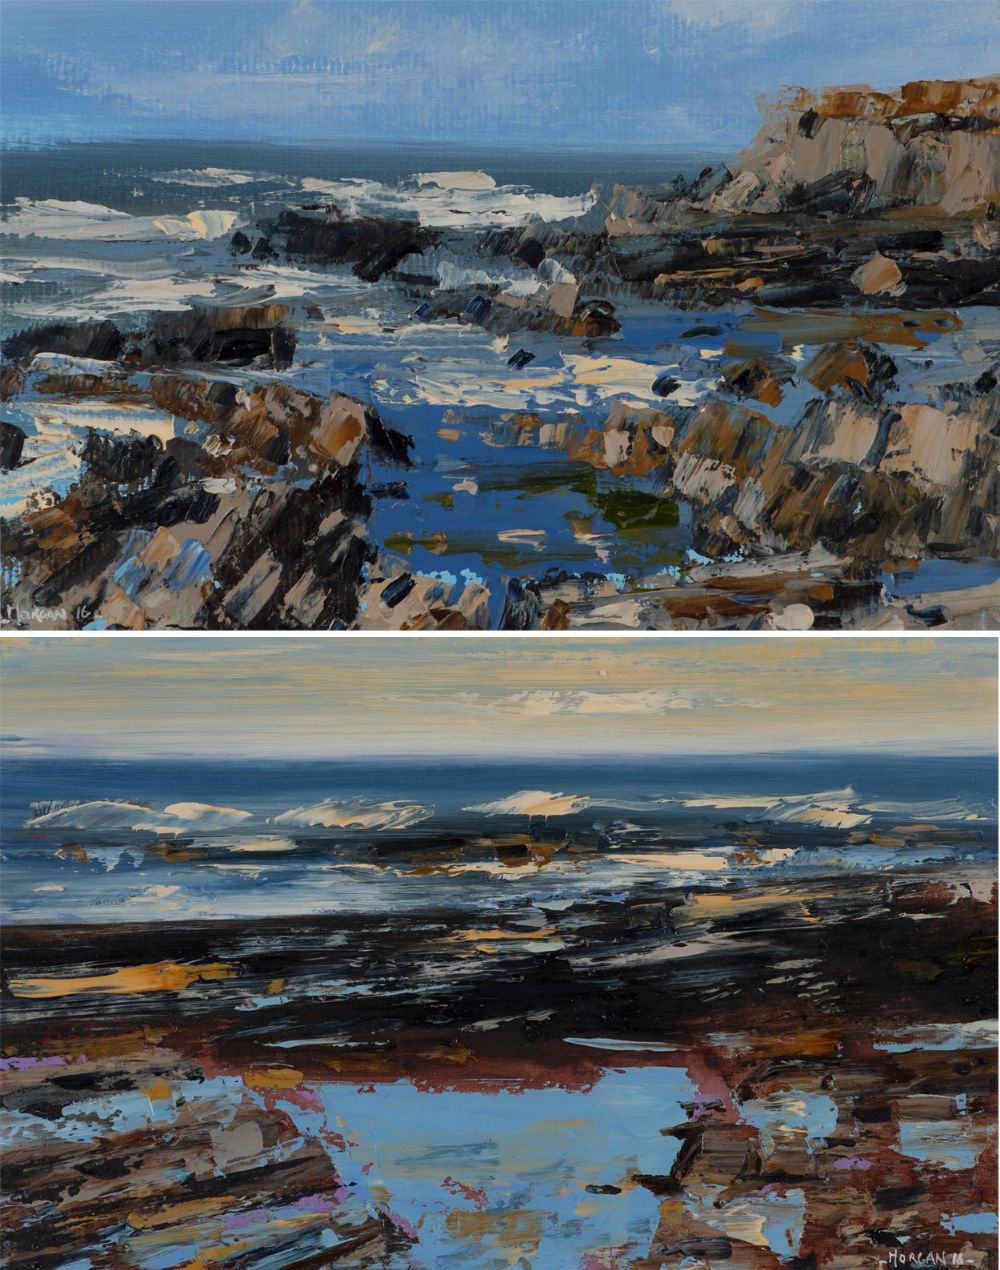 ROCKPOOLS, EDGE OF THE ATLANTIC by Henry Morgan  at Dolan's Art Auction House